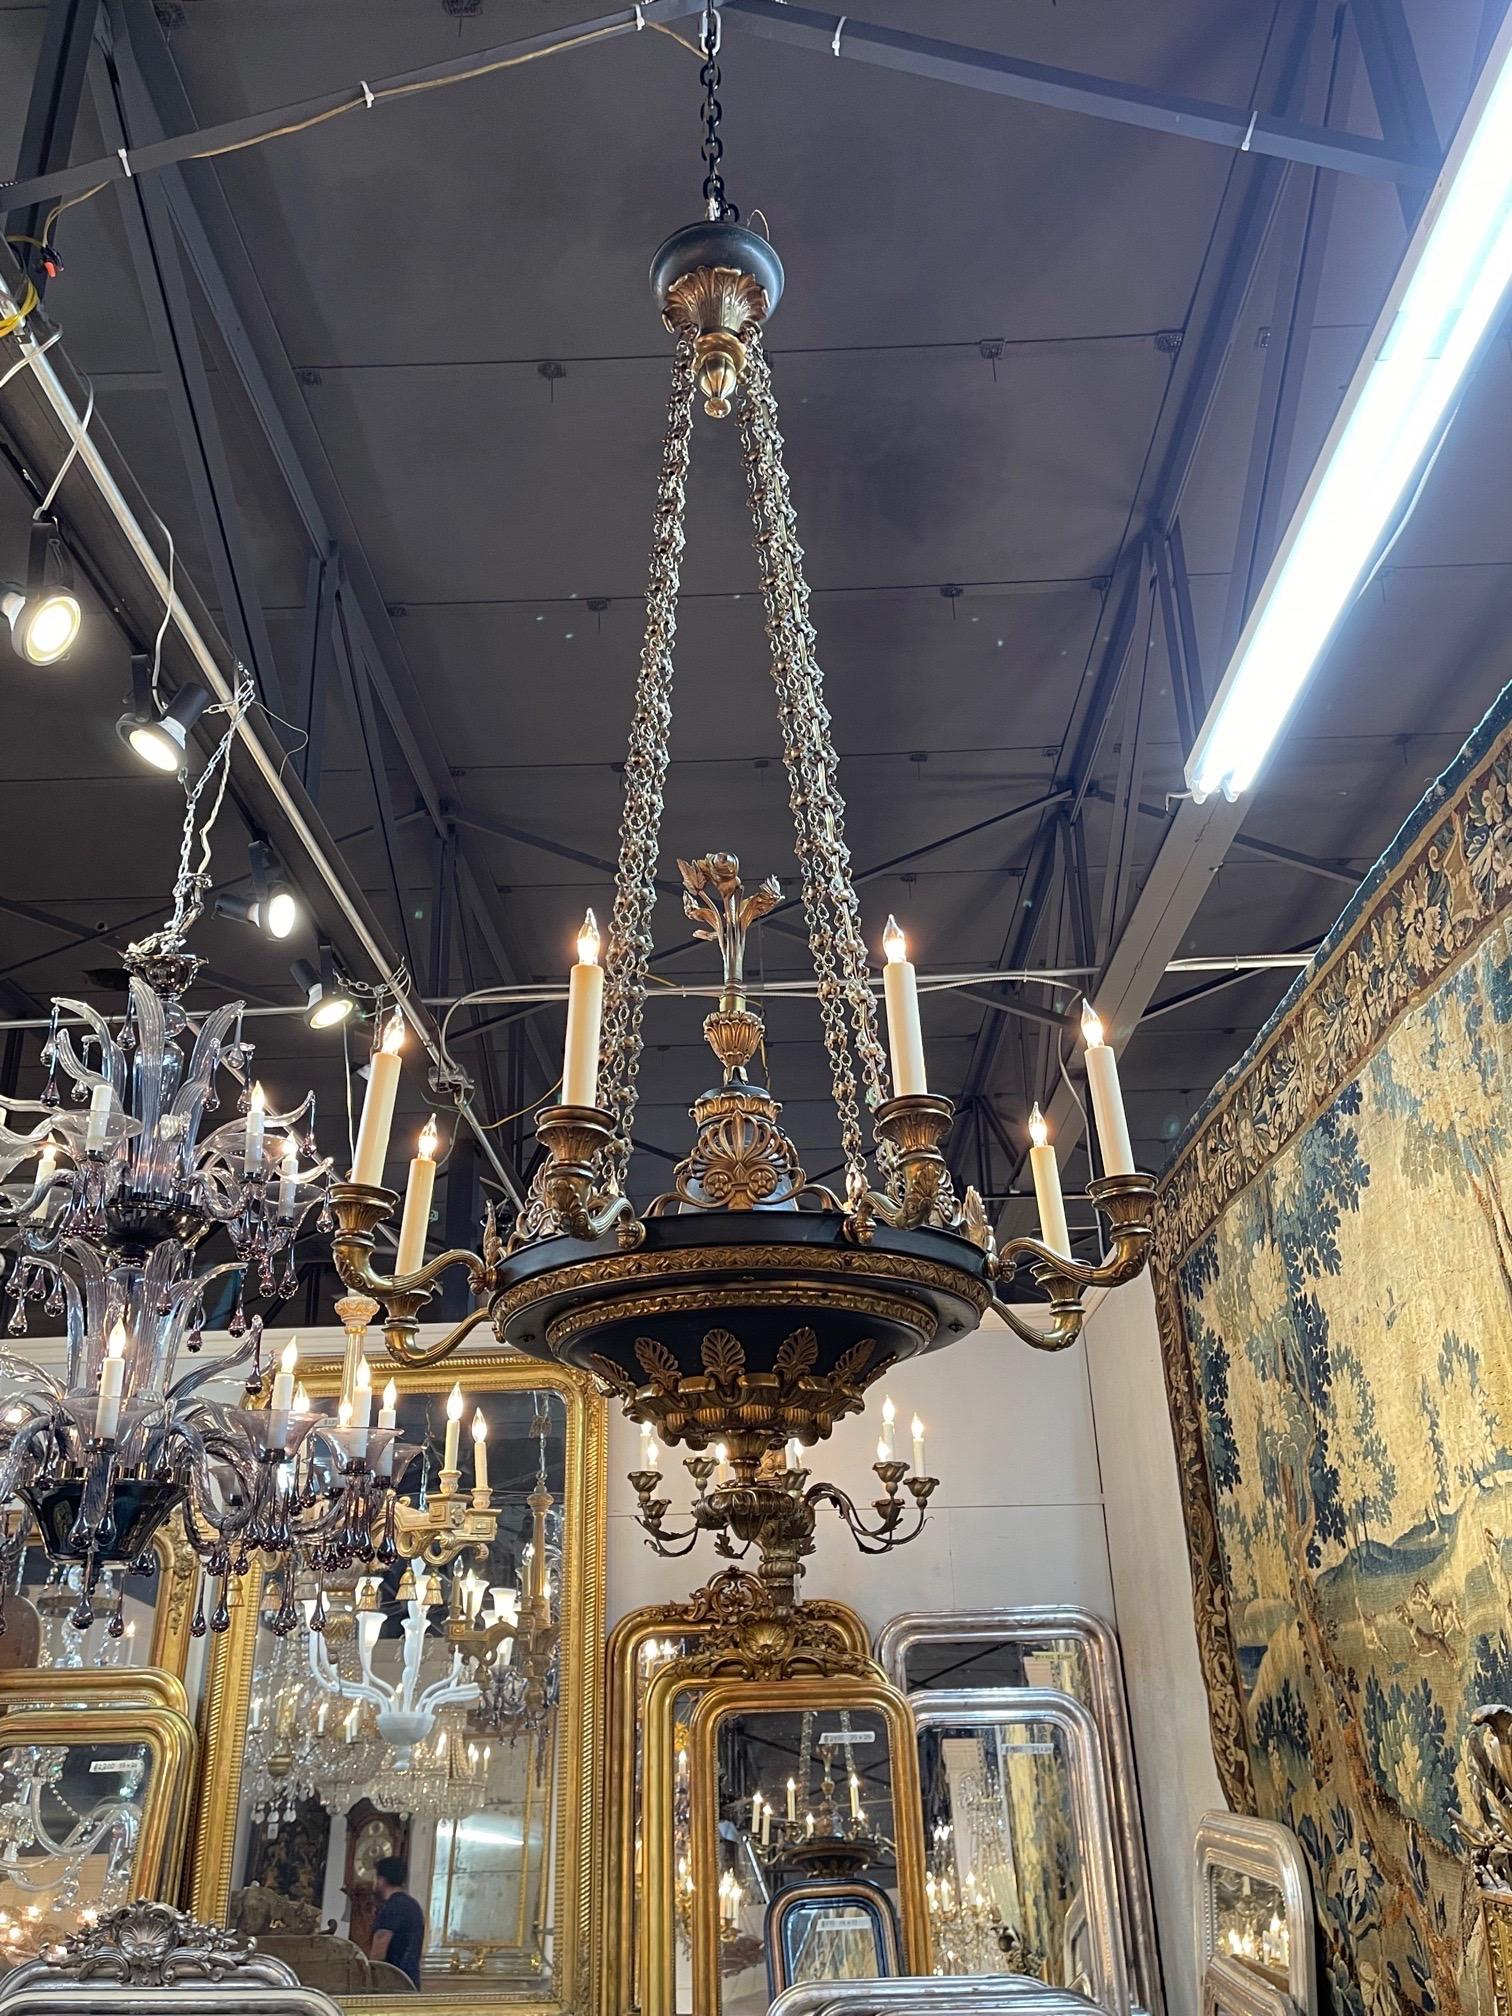 Handsome 19th century French Empire gilt bronze and tole chandelier with 8 lights. Such beautiful decorative tole details on this piece with leaf like and floral images and gorgeous arms as well. The chain is also extra special. Fabulous!